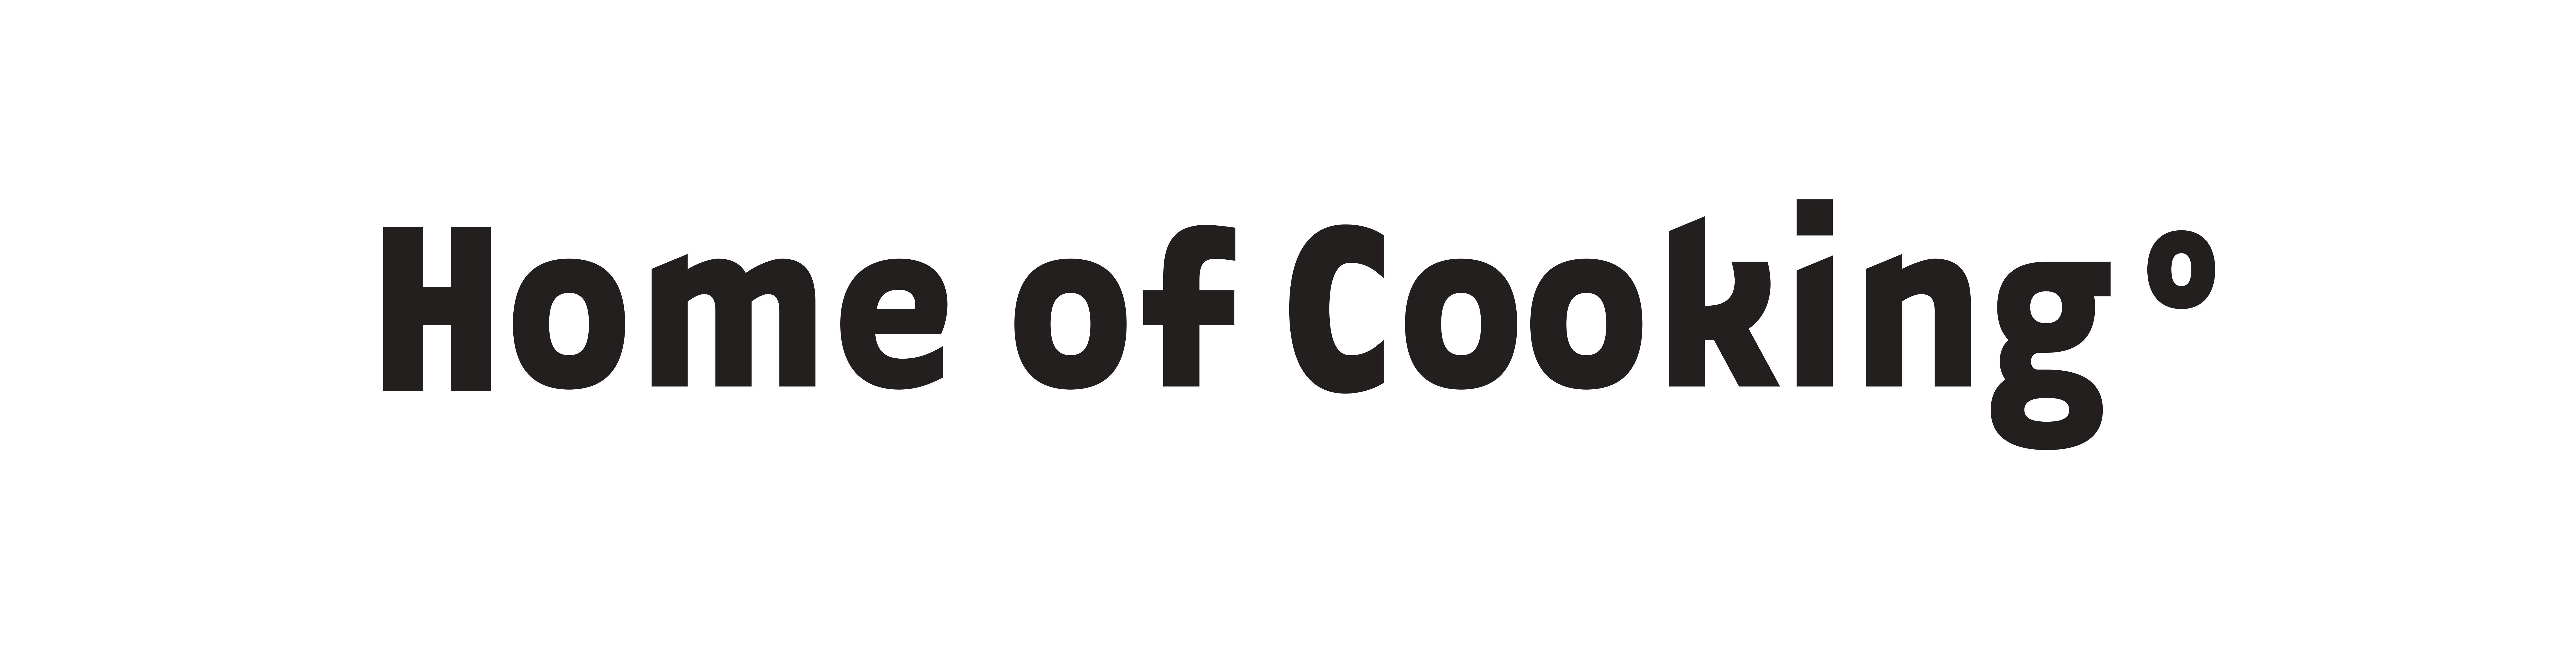 Cooking.com Logo - International Home Of Cooking – 2 shops: Avenue Louise & Munt Brussels